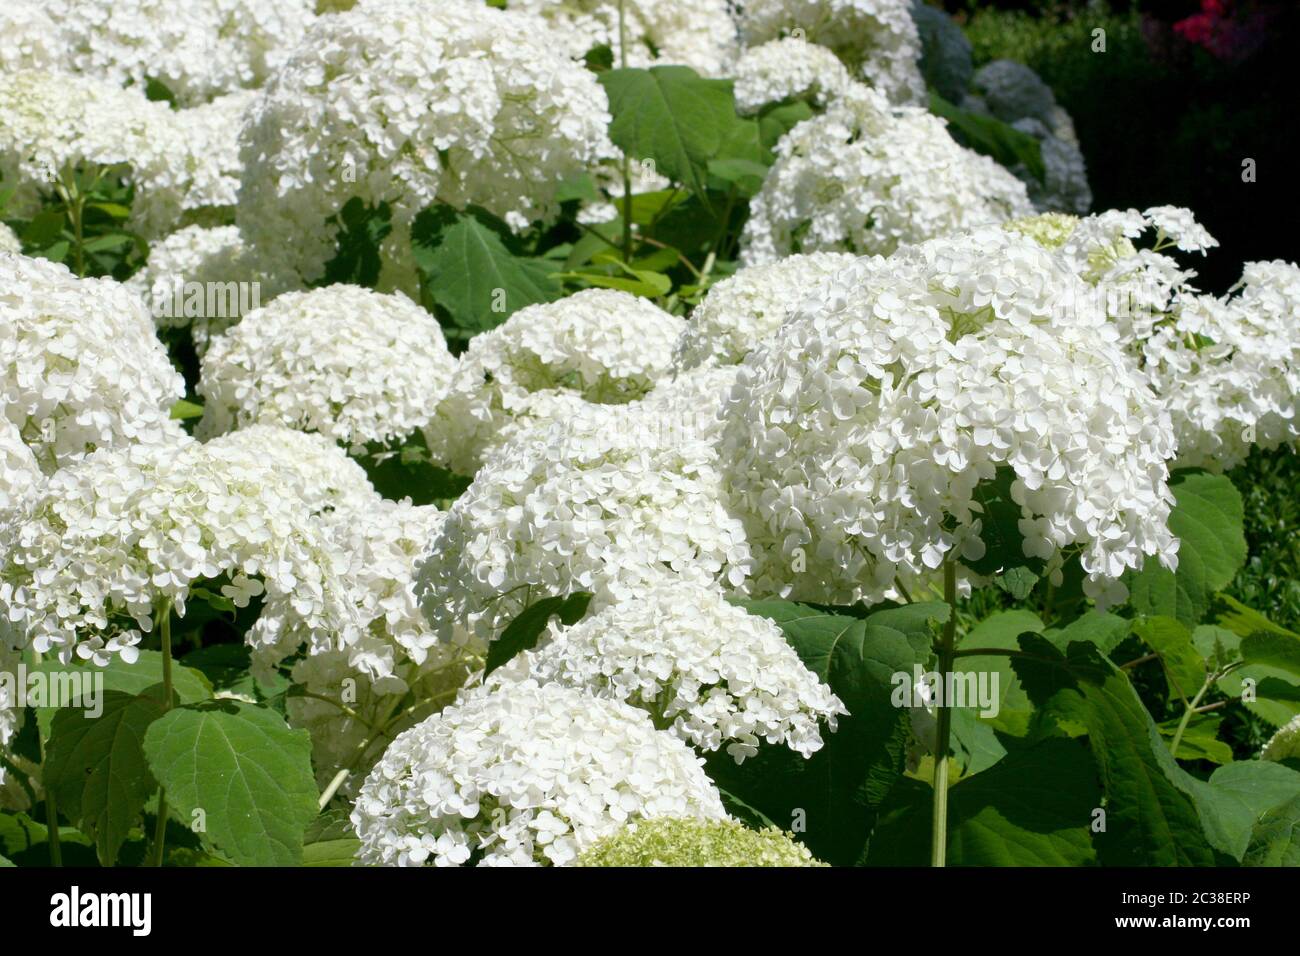 A white flowering hydrangea bush with many flowers Stock Photo